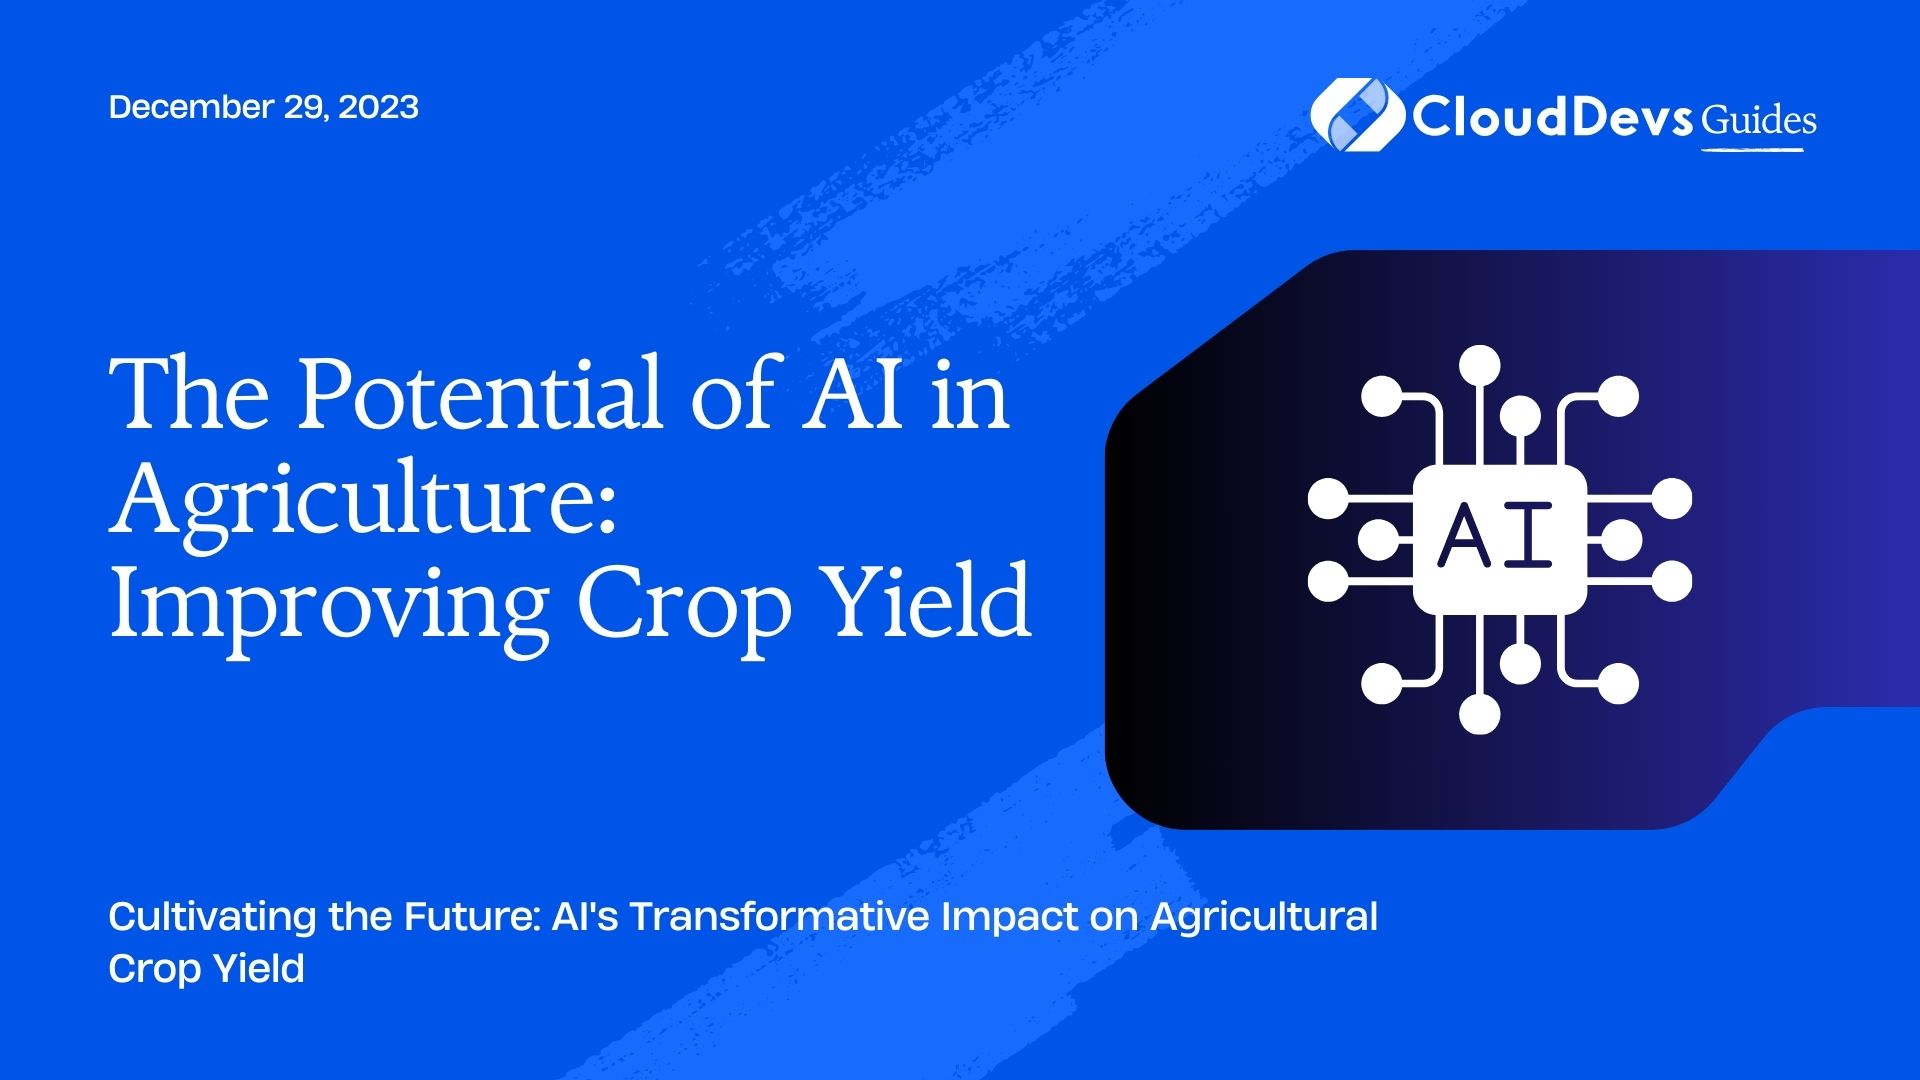 The Potential of AI in Agriculture: Improving Crop Yield